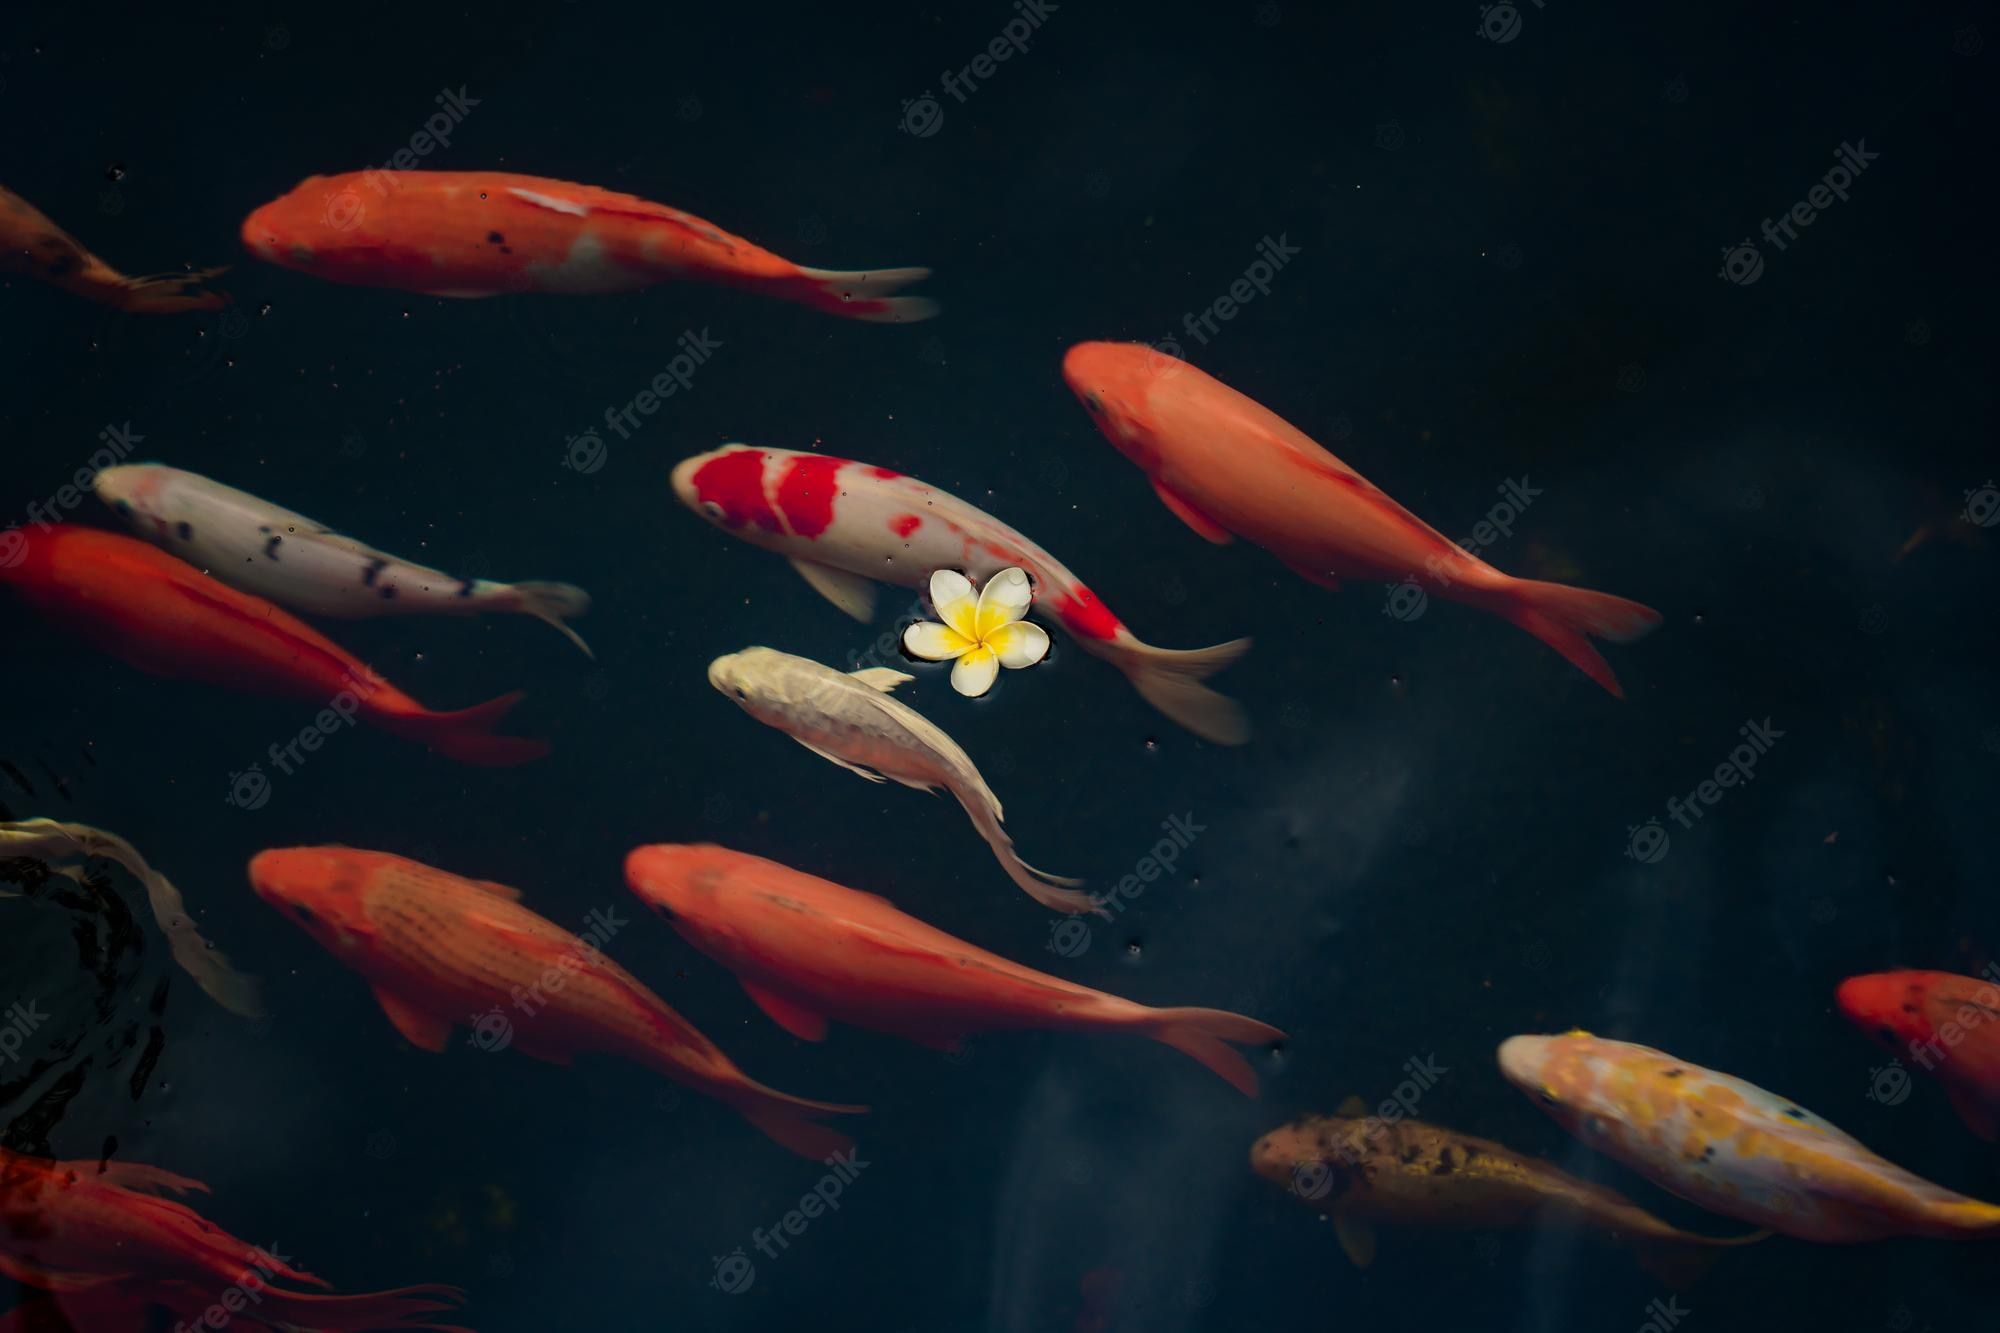 A school of colorful koi fish swimming in a pond - Koi fish